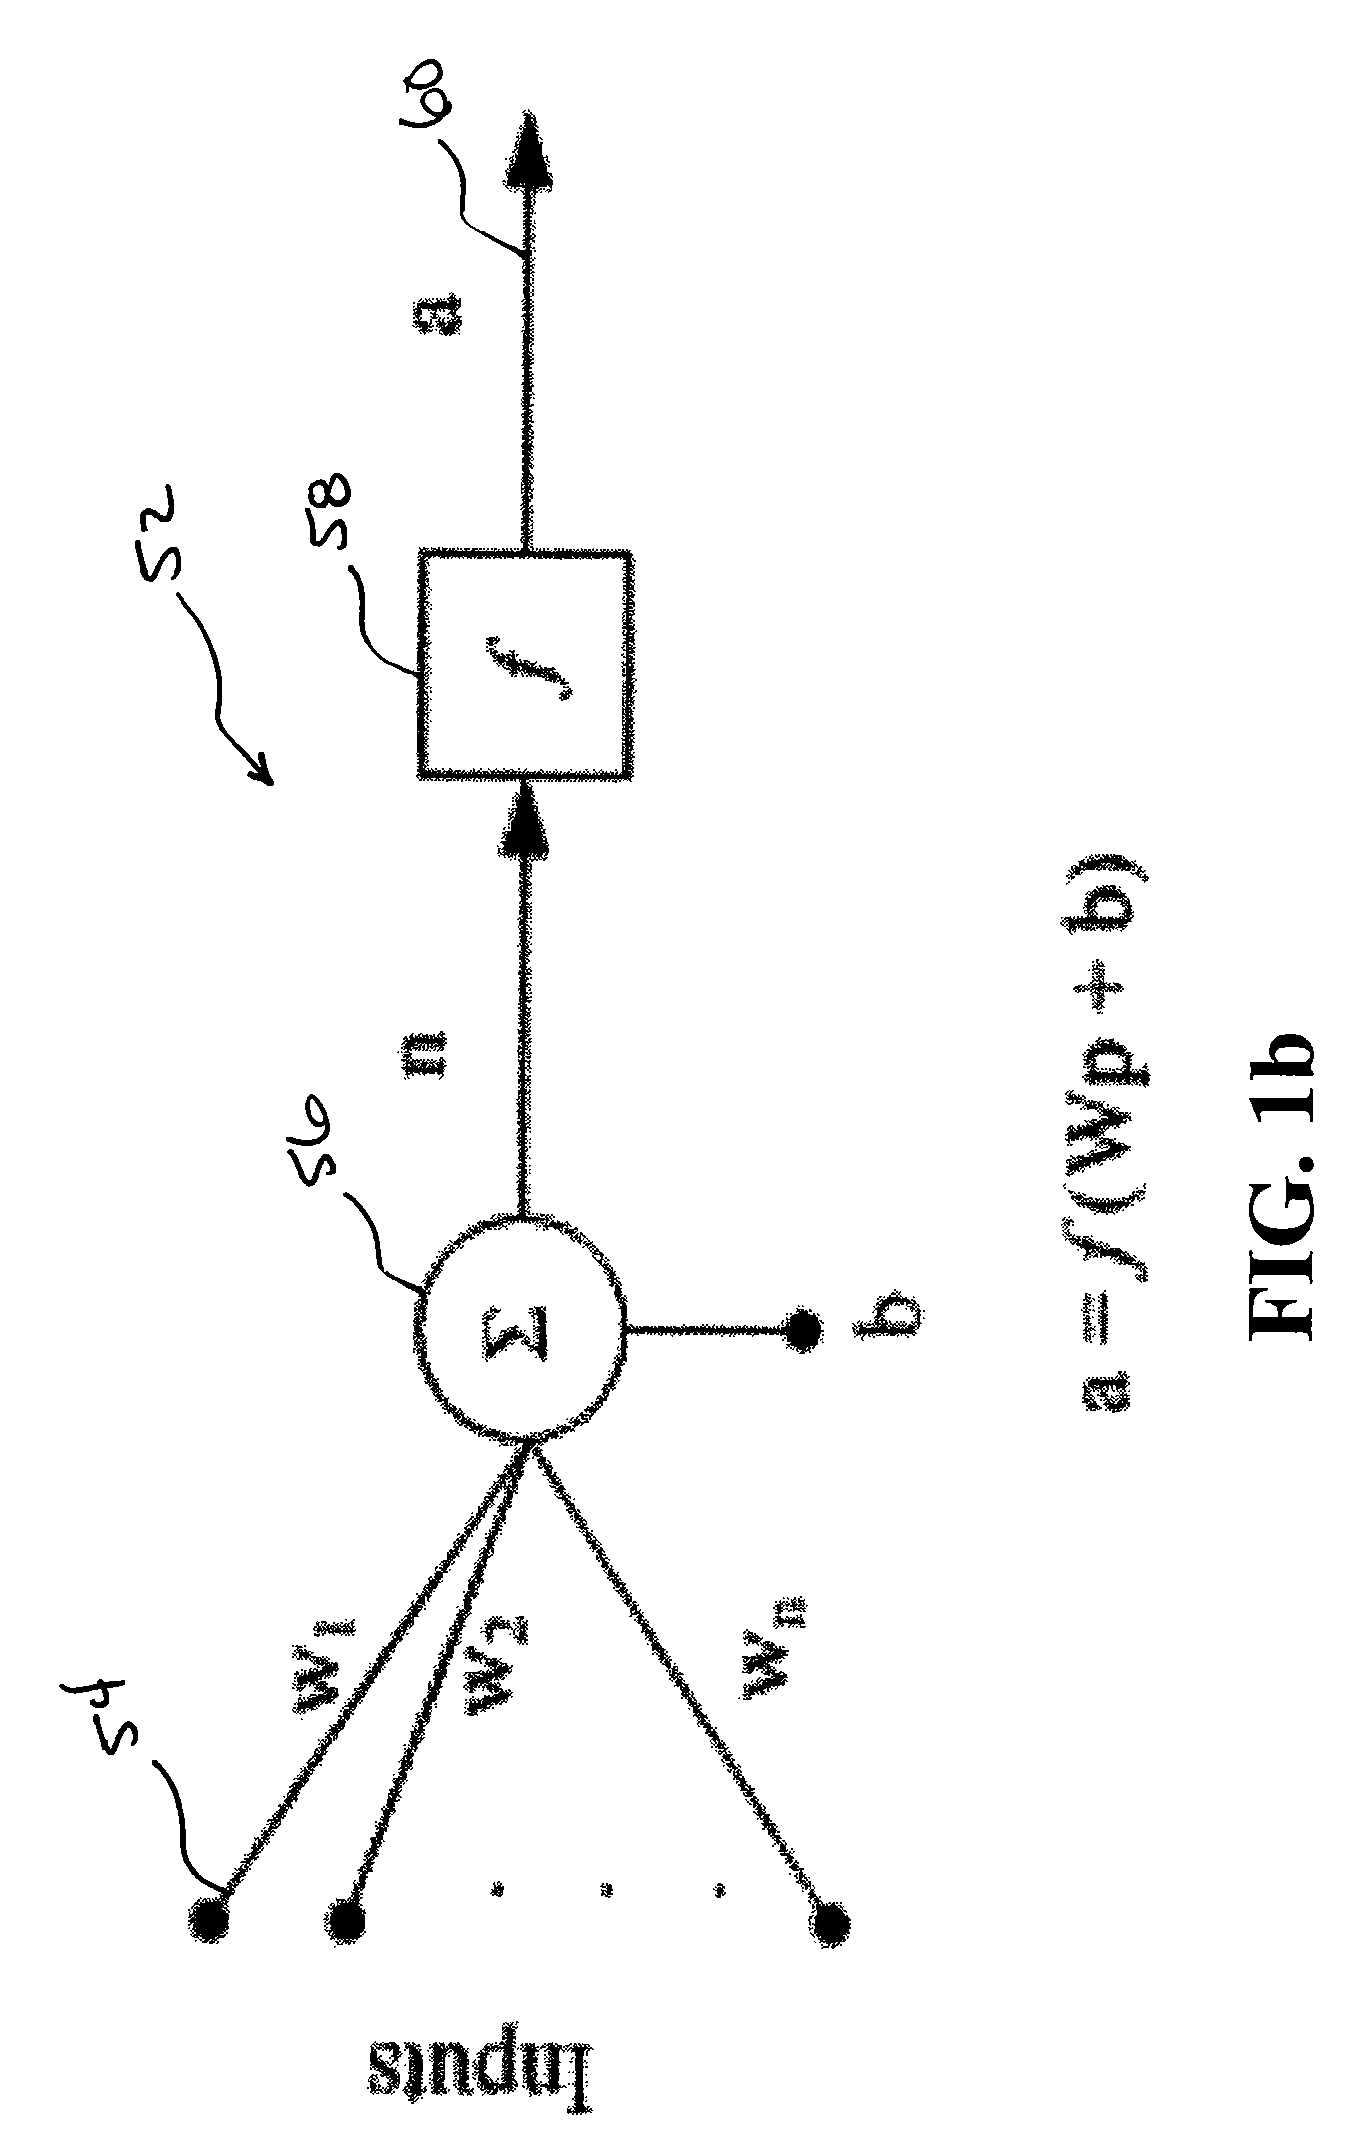 Adaptive control strategy and method for optimizing hybrid electric vehicles